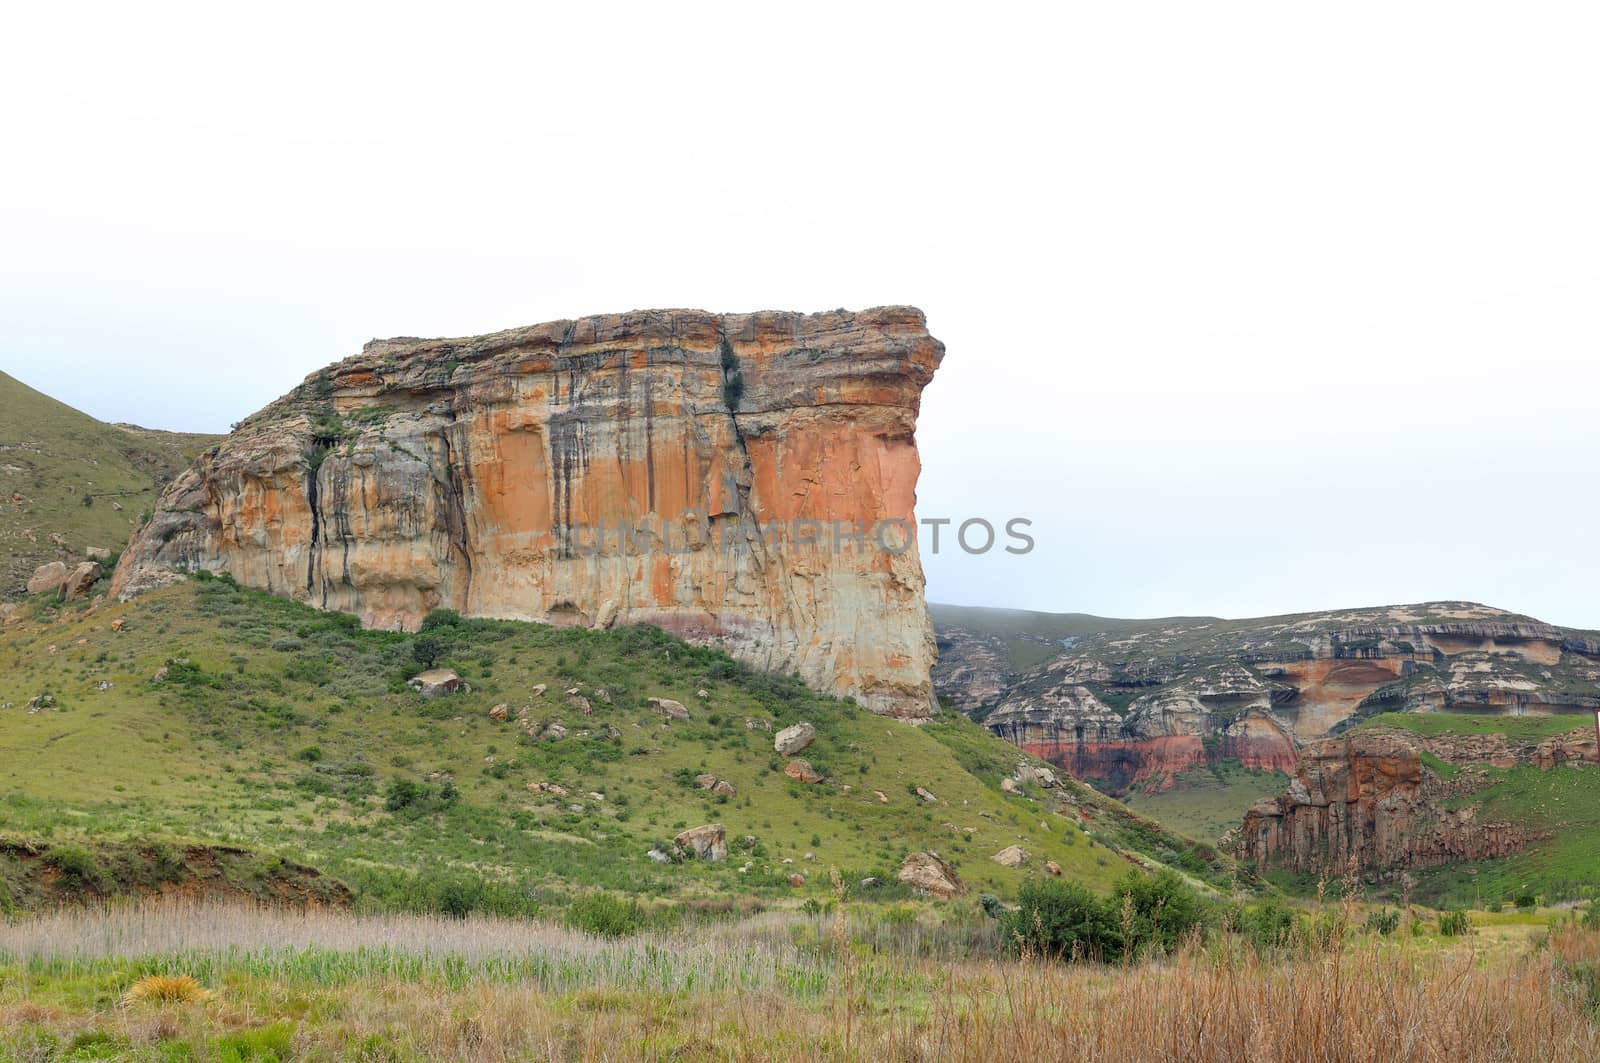 Red, orange and yellow sandstone cliffs in the Golden Gate Highlands National Park, South Africa